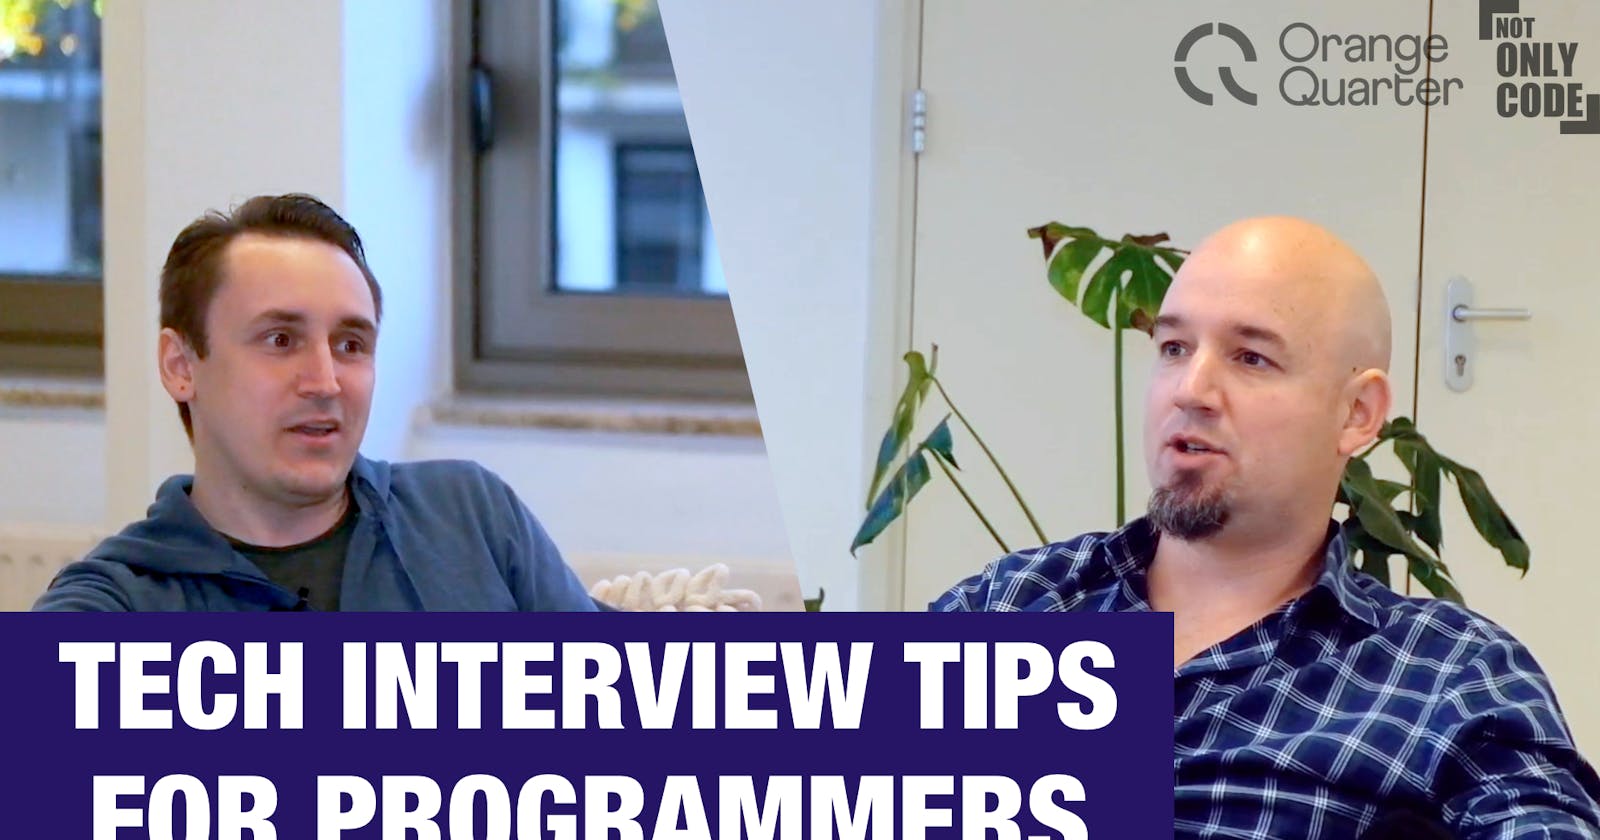 Technical interview tips - interview with CTO